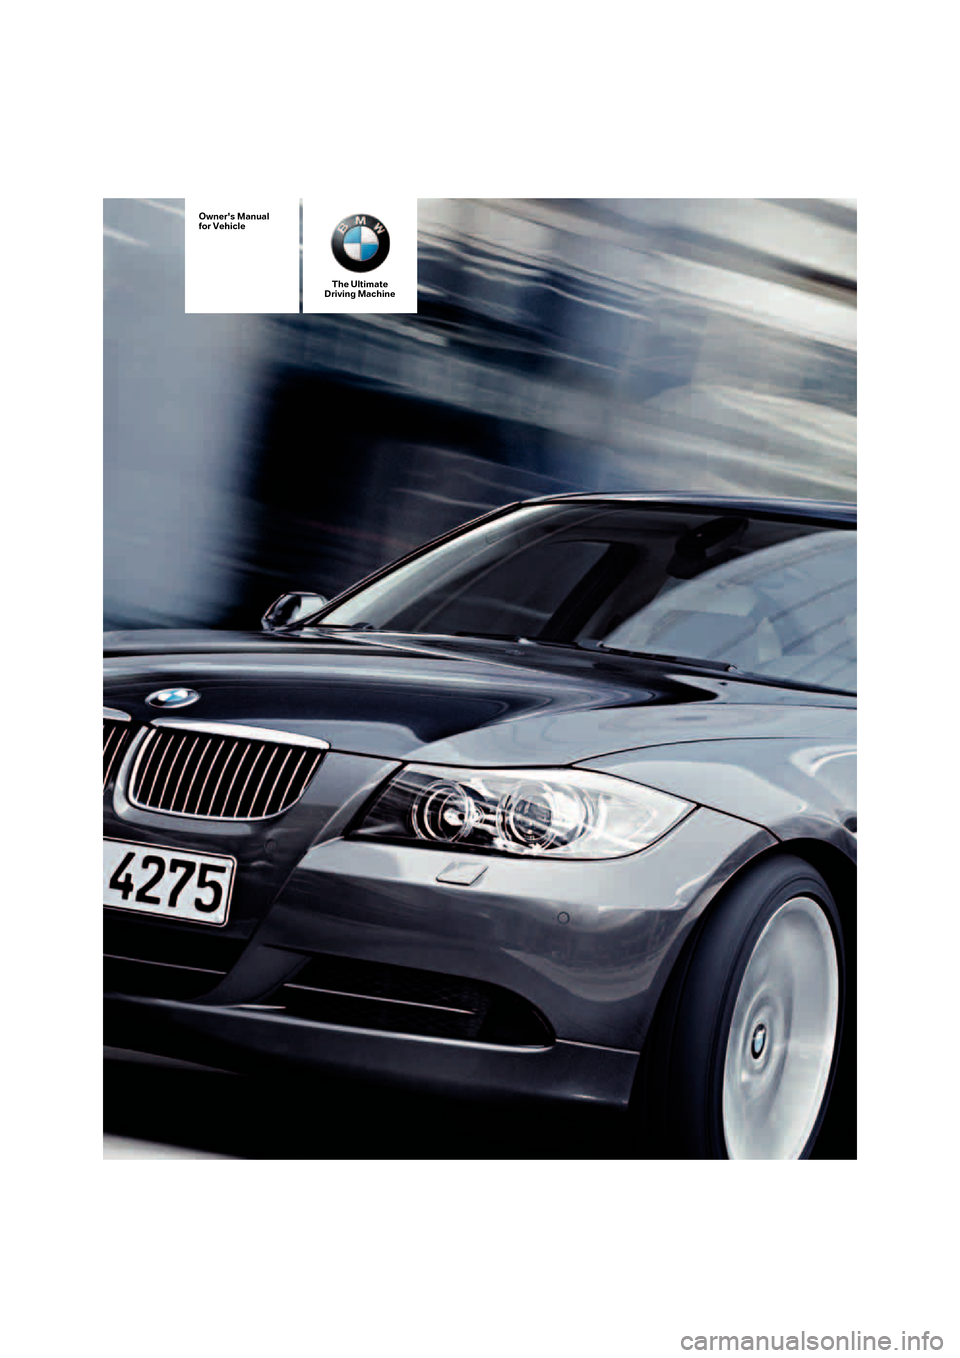 BMW 325I SEDAN 2005 E90 Owners Manual The Ultimate
Driving Machine
Owners Manual
for Vehicle 